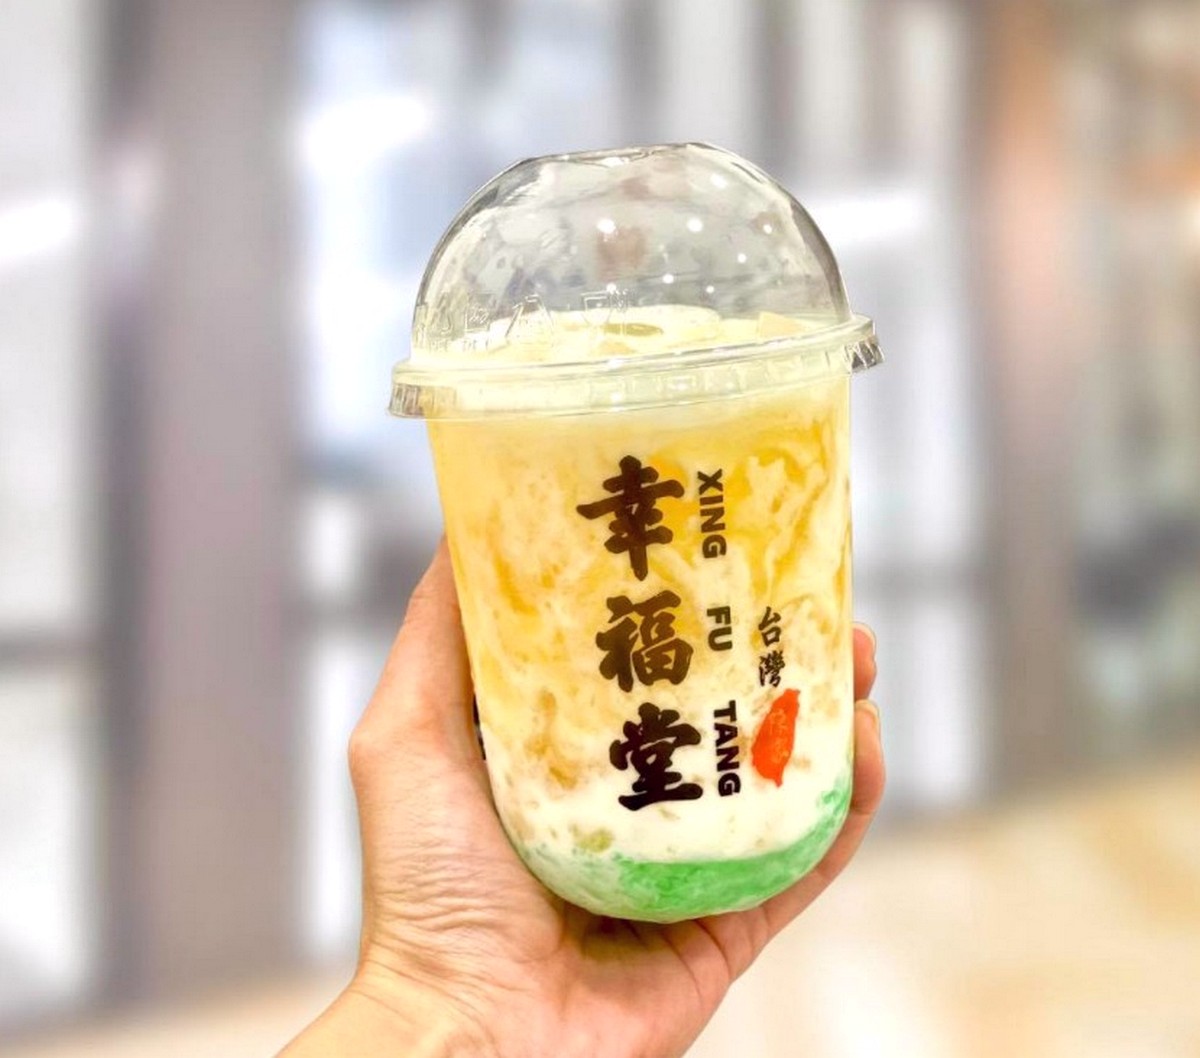 Xing-Fu-Tang-Taiwan-Milk-Tea-celebrates-2nd-birthday-anniversary-Promotion-Singapore-with-1-for-1-Offers-deal-till-30-Jun-2021-Warehouse-Sale-Clearance 1-30 Jun 2021: Xing Fu Tang Happy 2nd Birthday 1-For-1 Promo on Thailand Series Milk Tea for Delivery & Takeaway at All Outlets in Singapore